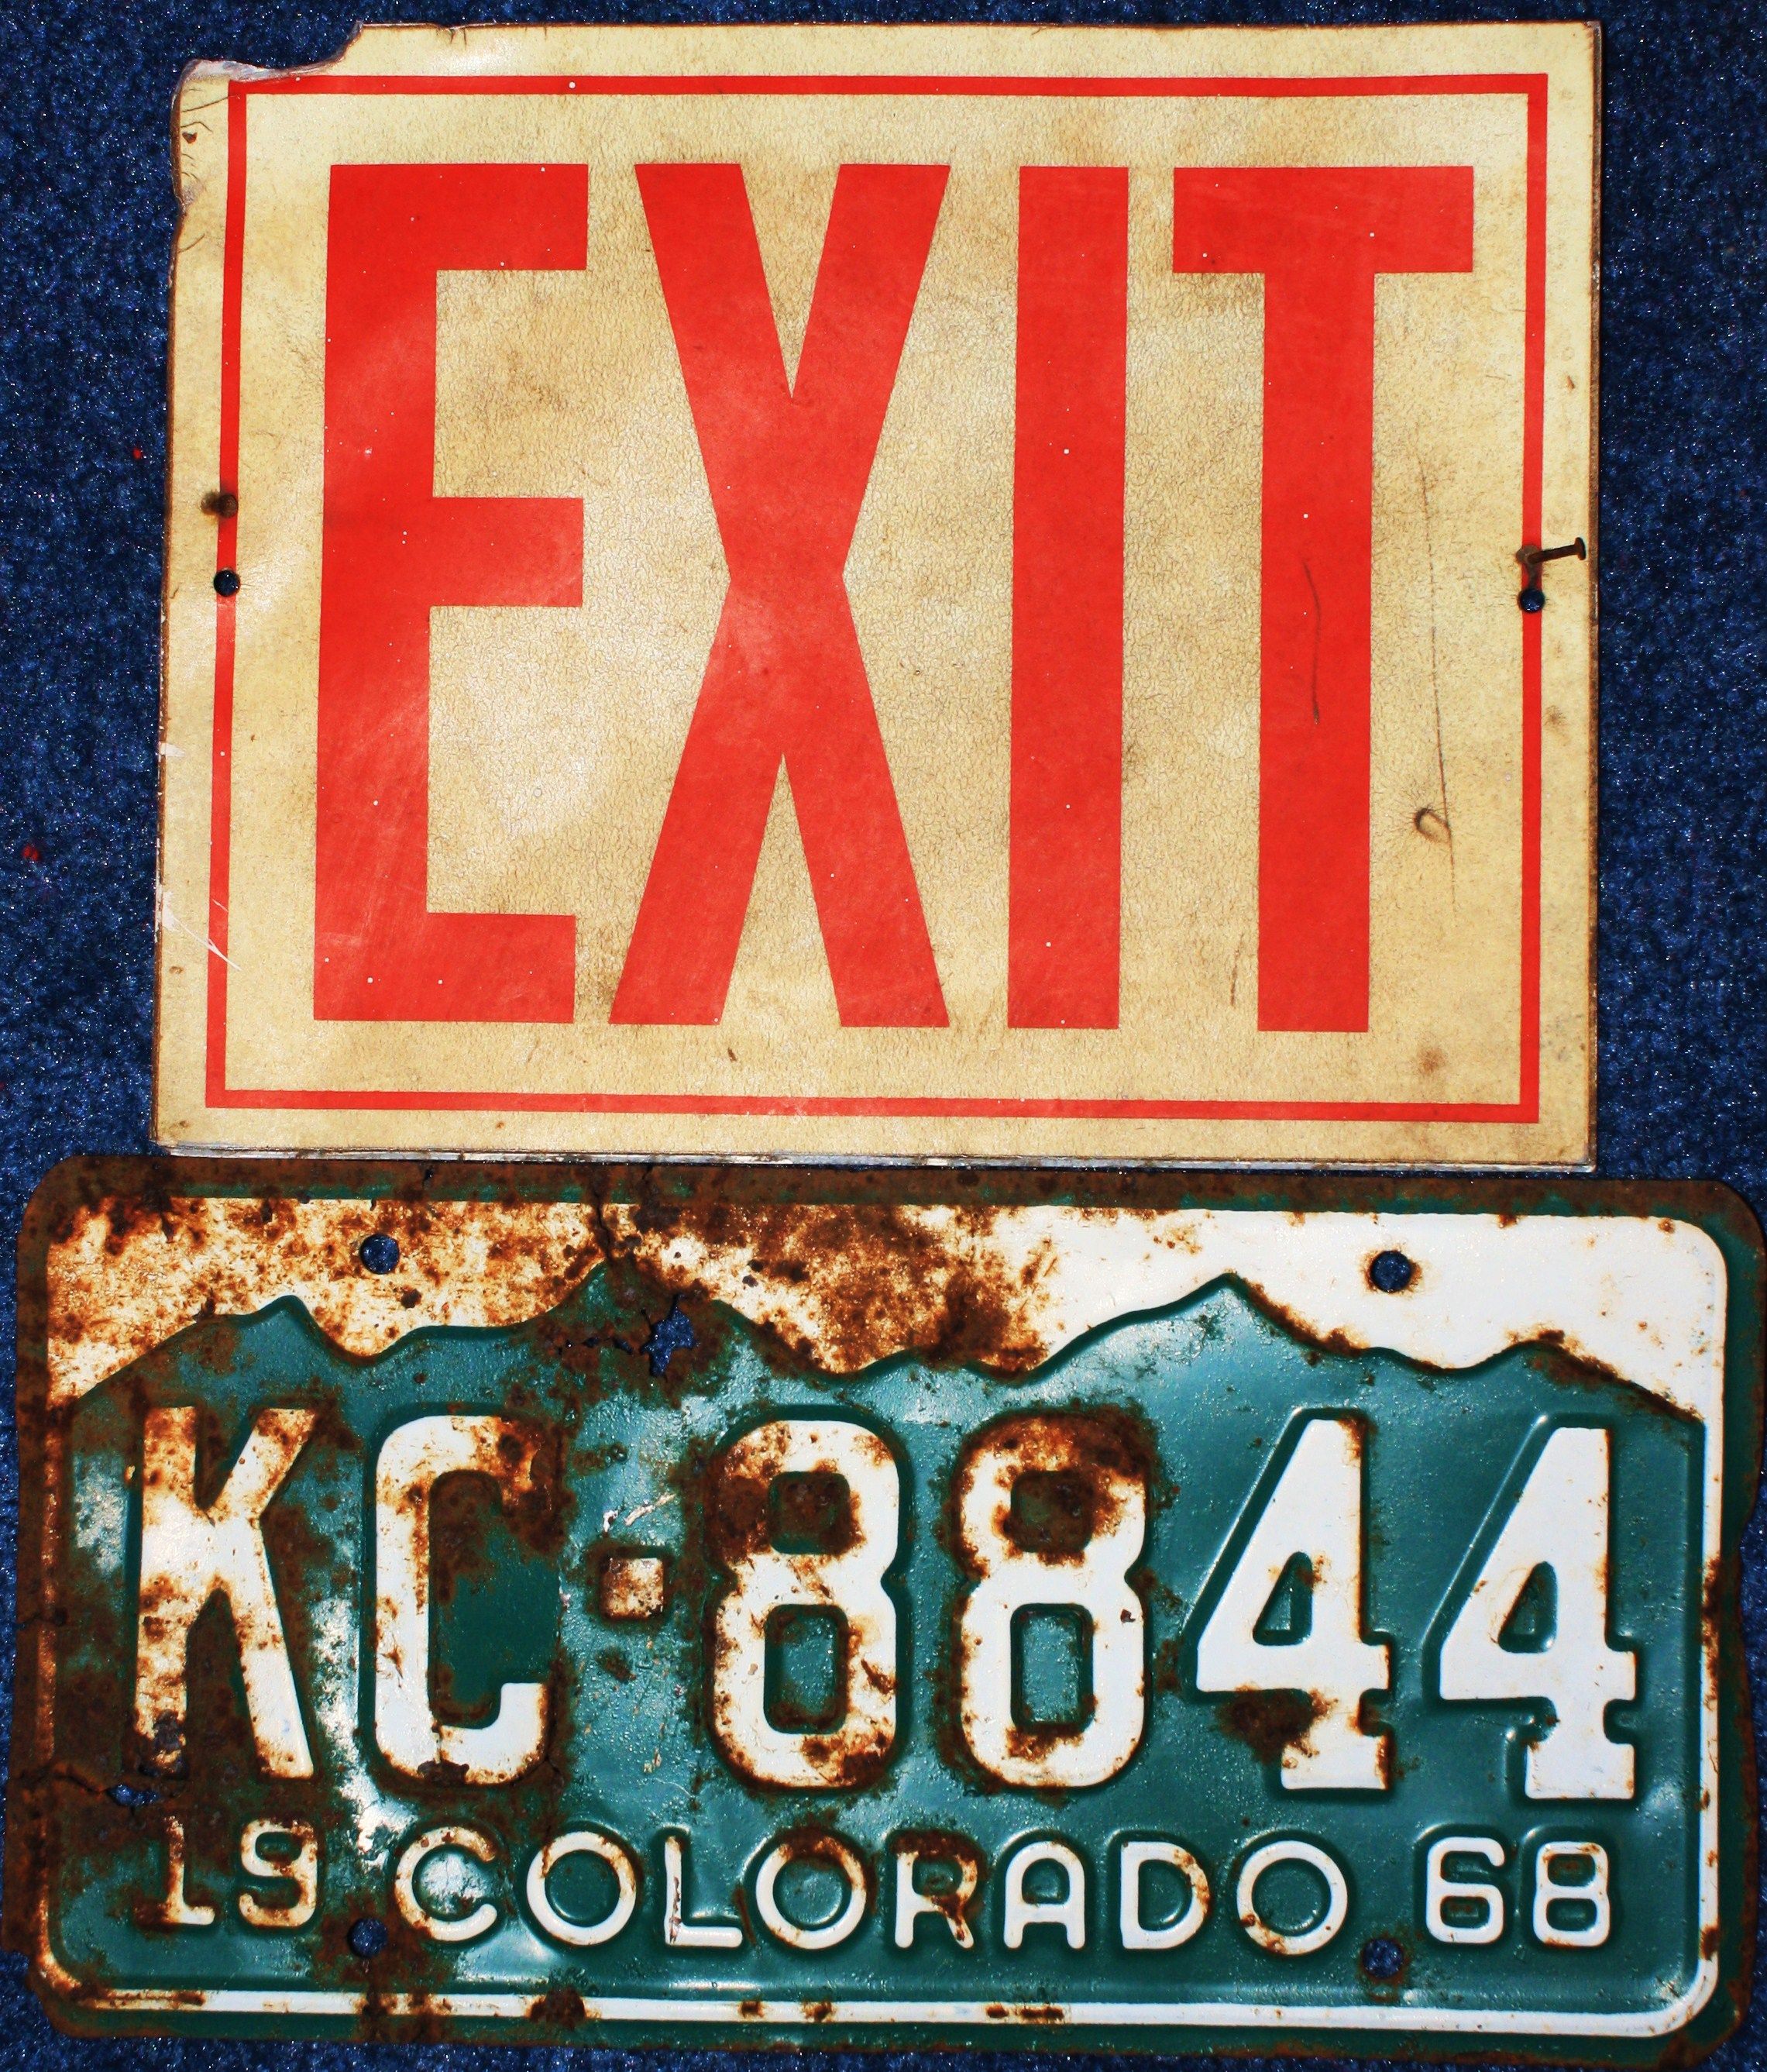 IMG 2232 An Exit and Colorado(1968) plate.  Found very close to one another.  I thought it was cool.  The Exit sign still glows when the lights go out